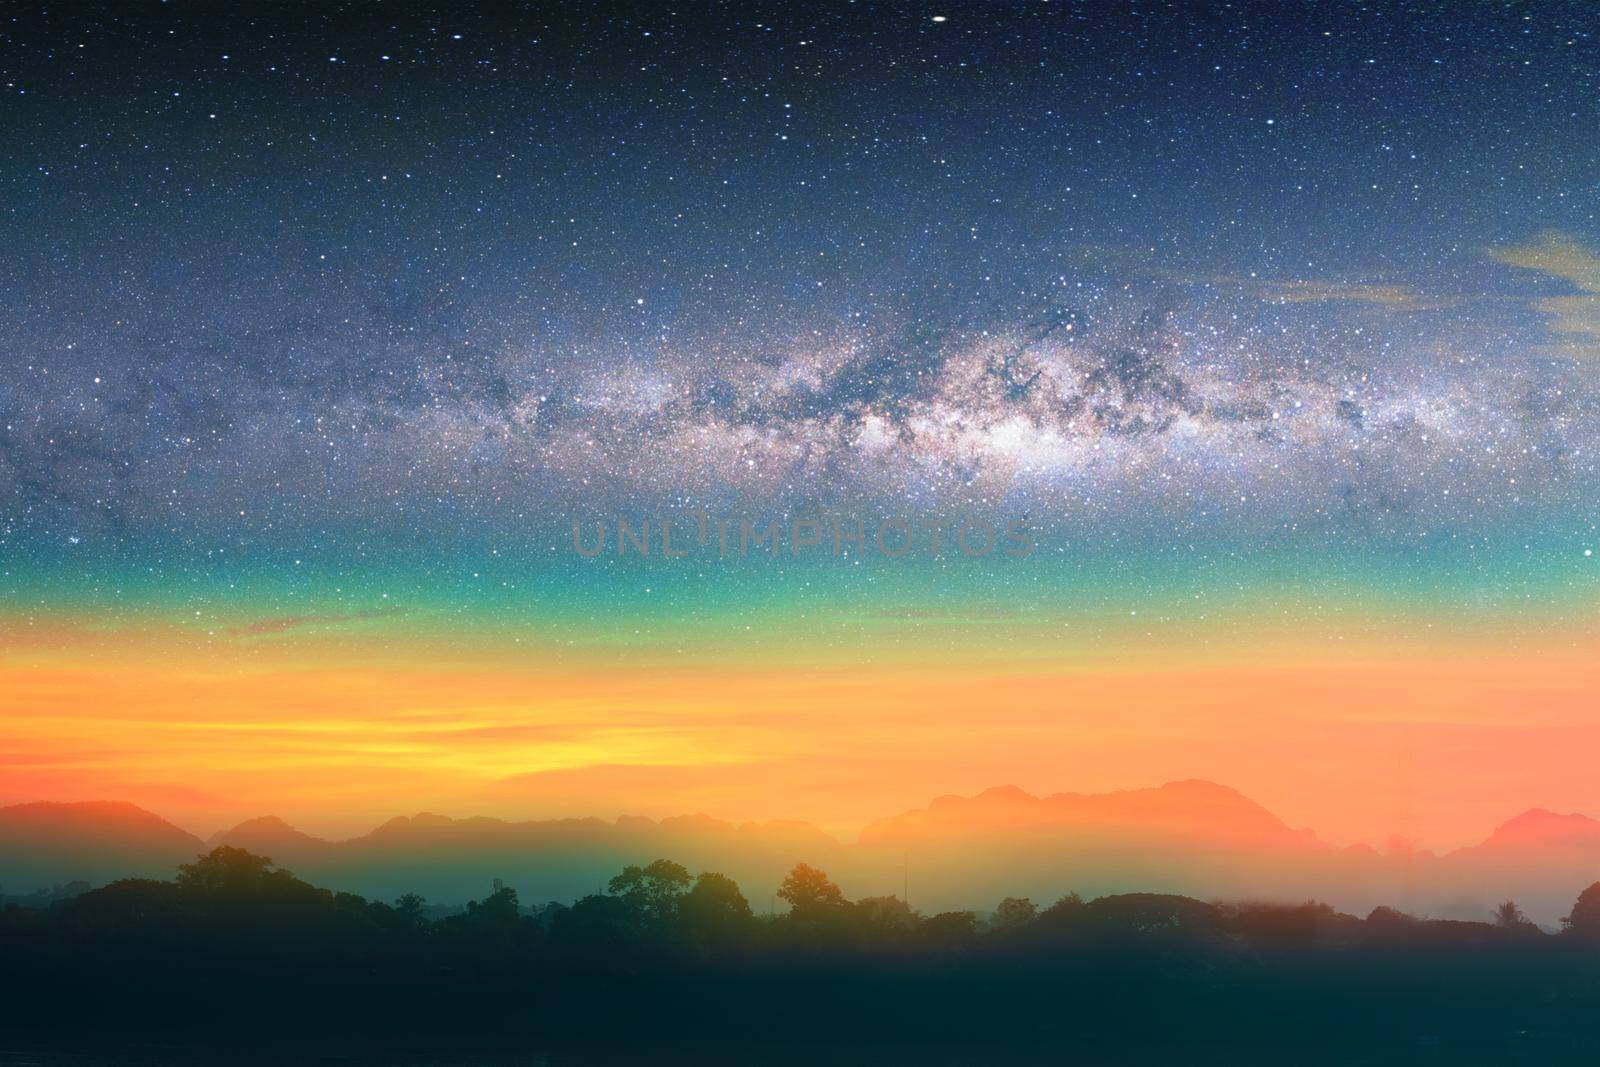 Milky way night landscape sunset rainbow light over silhouette mountain, space and stars on sky background